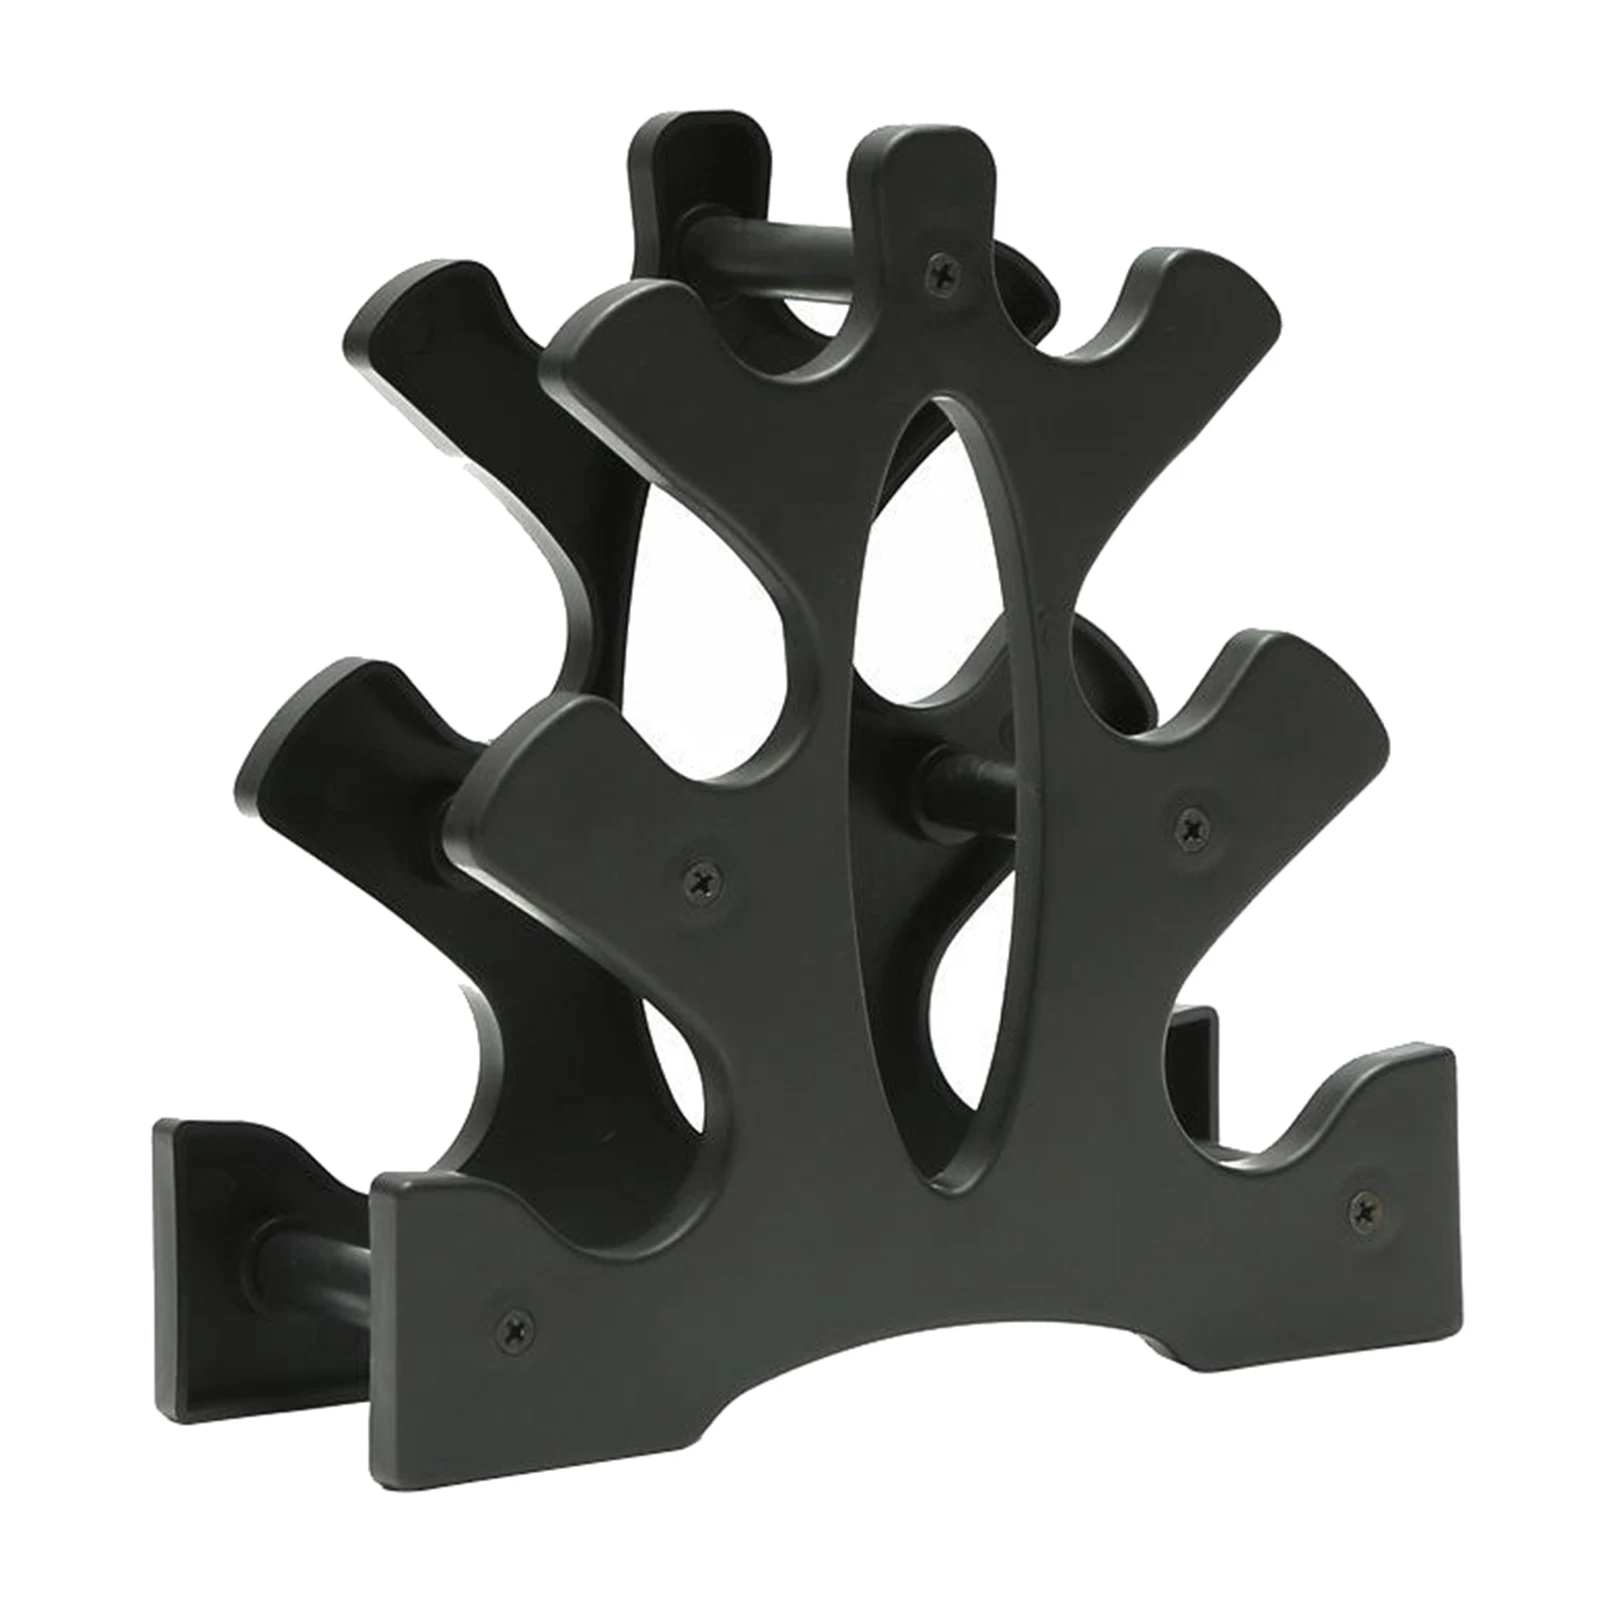 3-Tier Dumbbell Rack Home Solid Hand Weights Holder Tree Stand Bracket